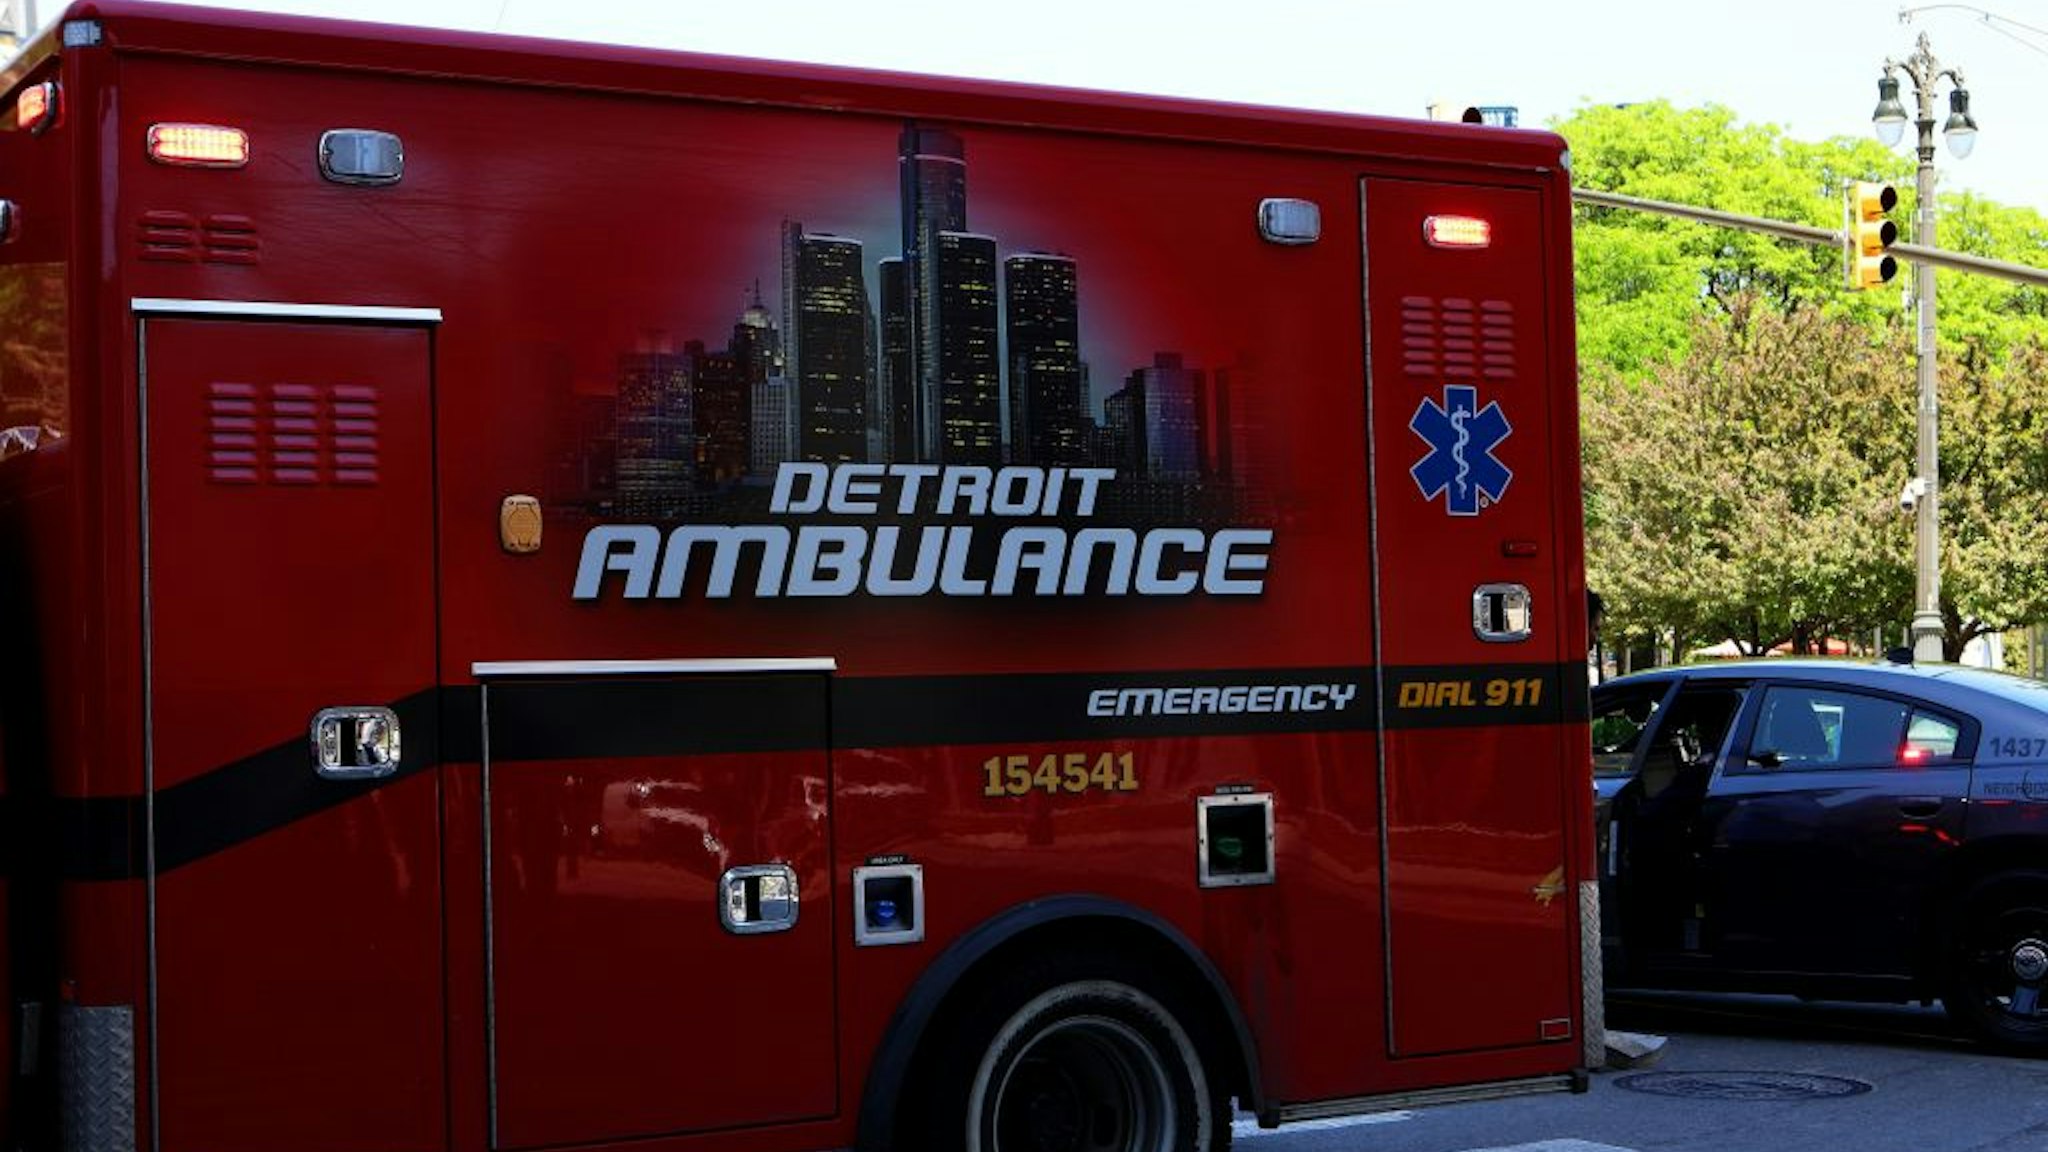 DETROIT - MAY 25: A Detroit Ambulance makes its way through downtown in Detroit, Michigan on May 25, 2018. (Photo By Raymond Boyd/Getty Images)